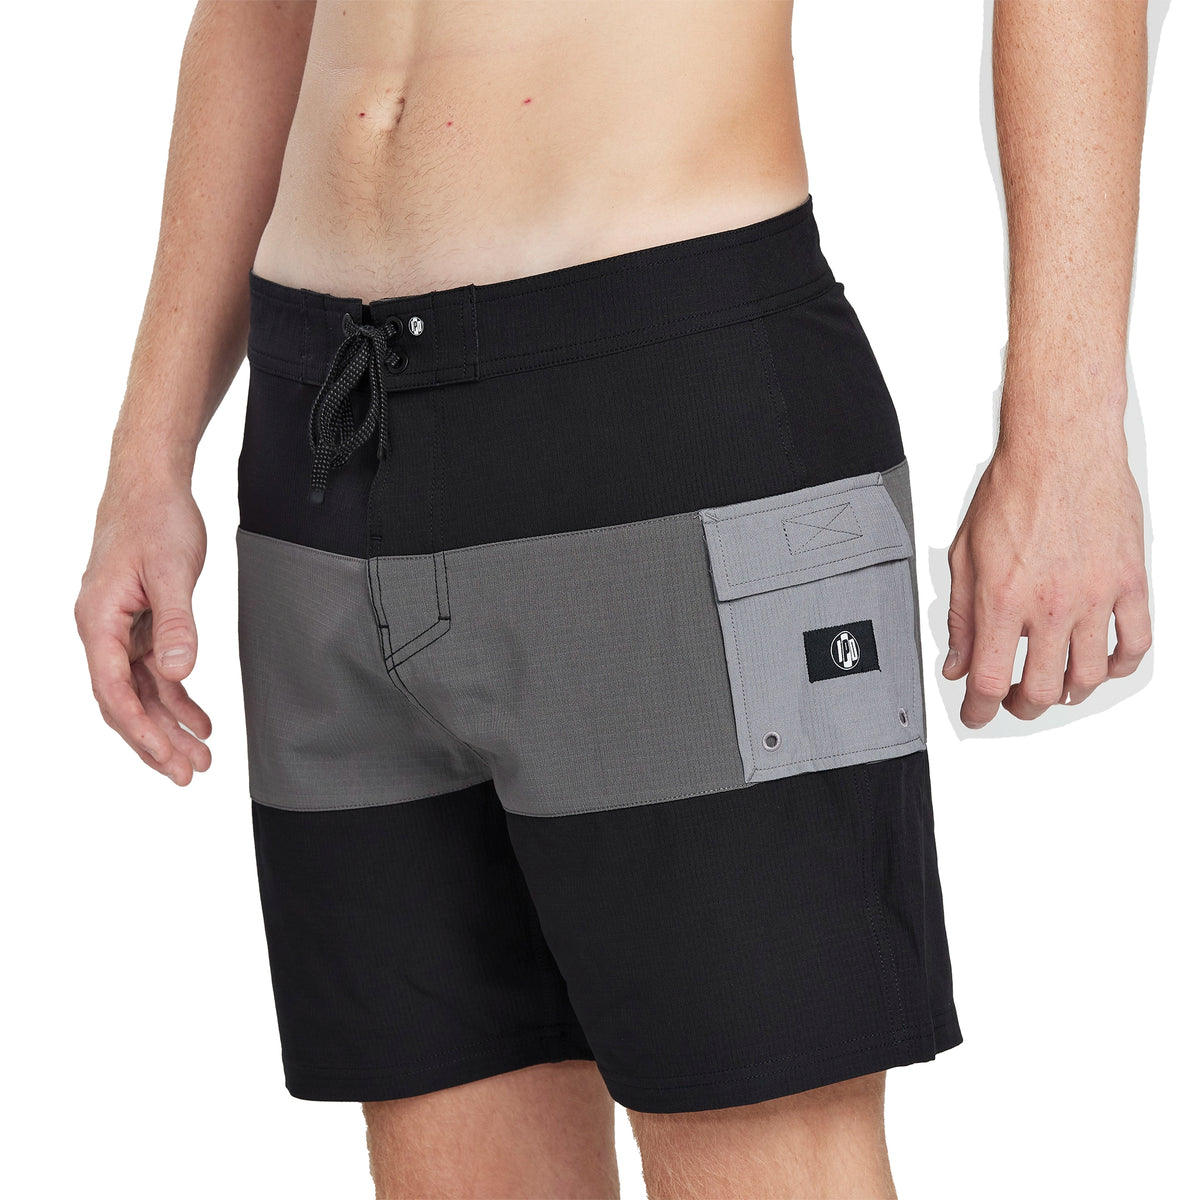 black and gray boardshorts  taken from front side